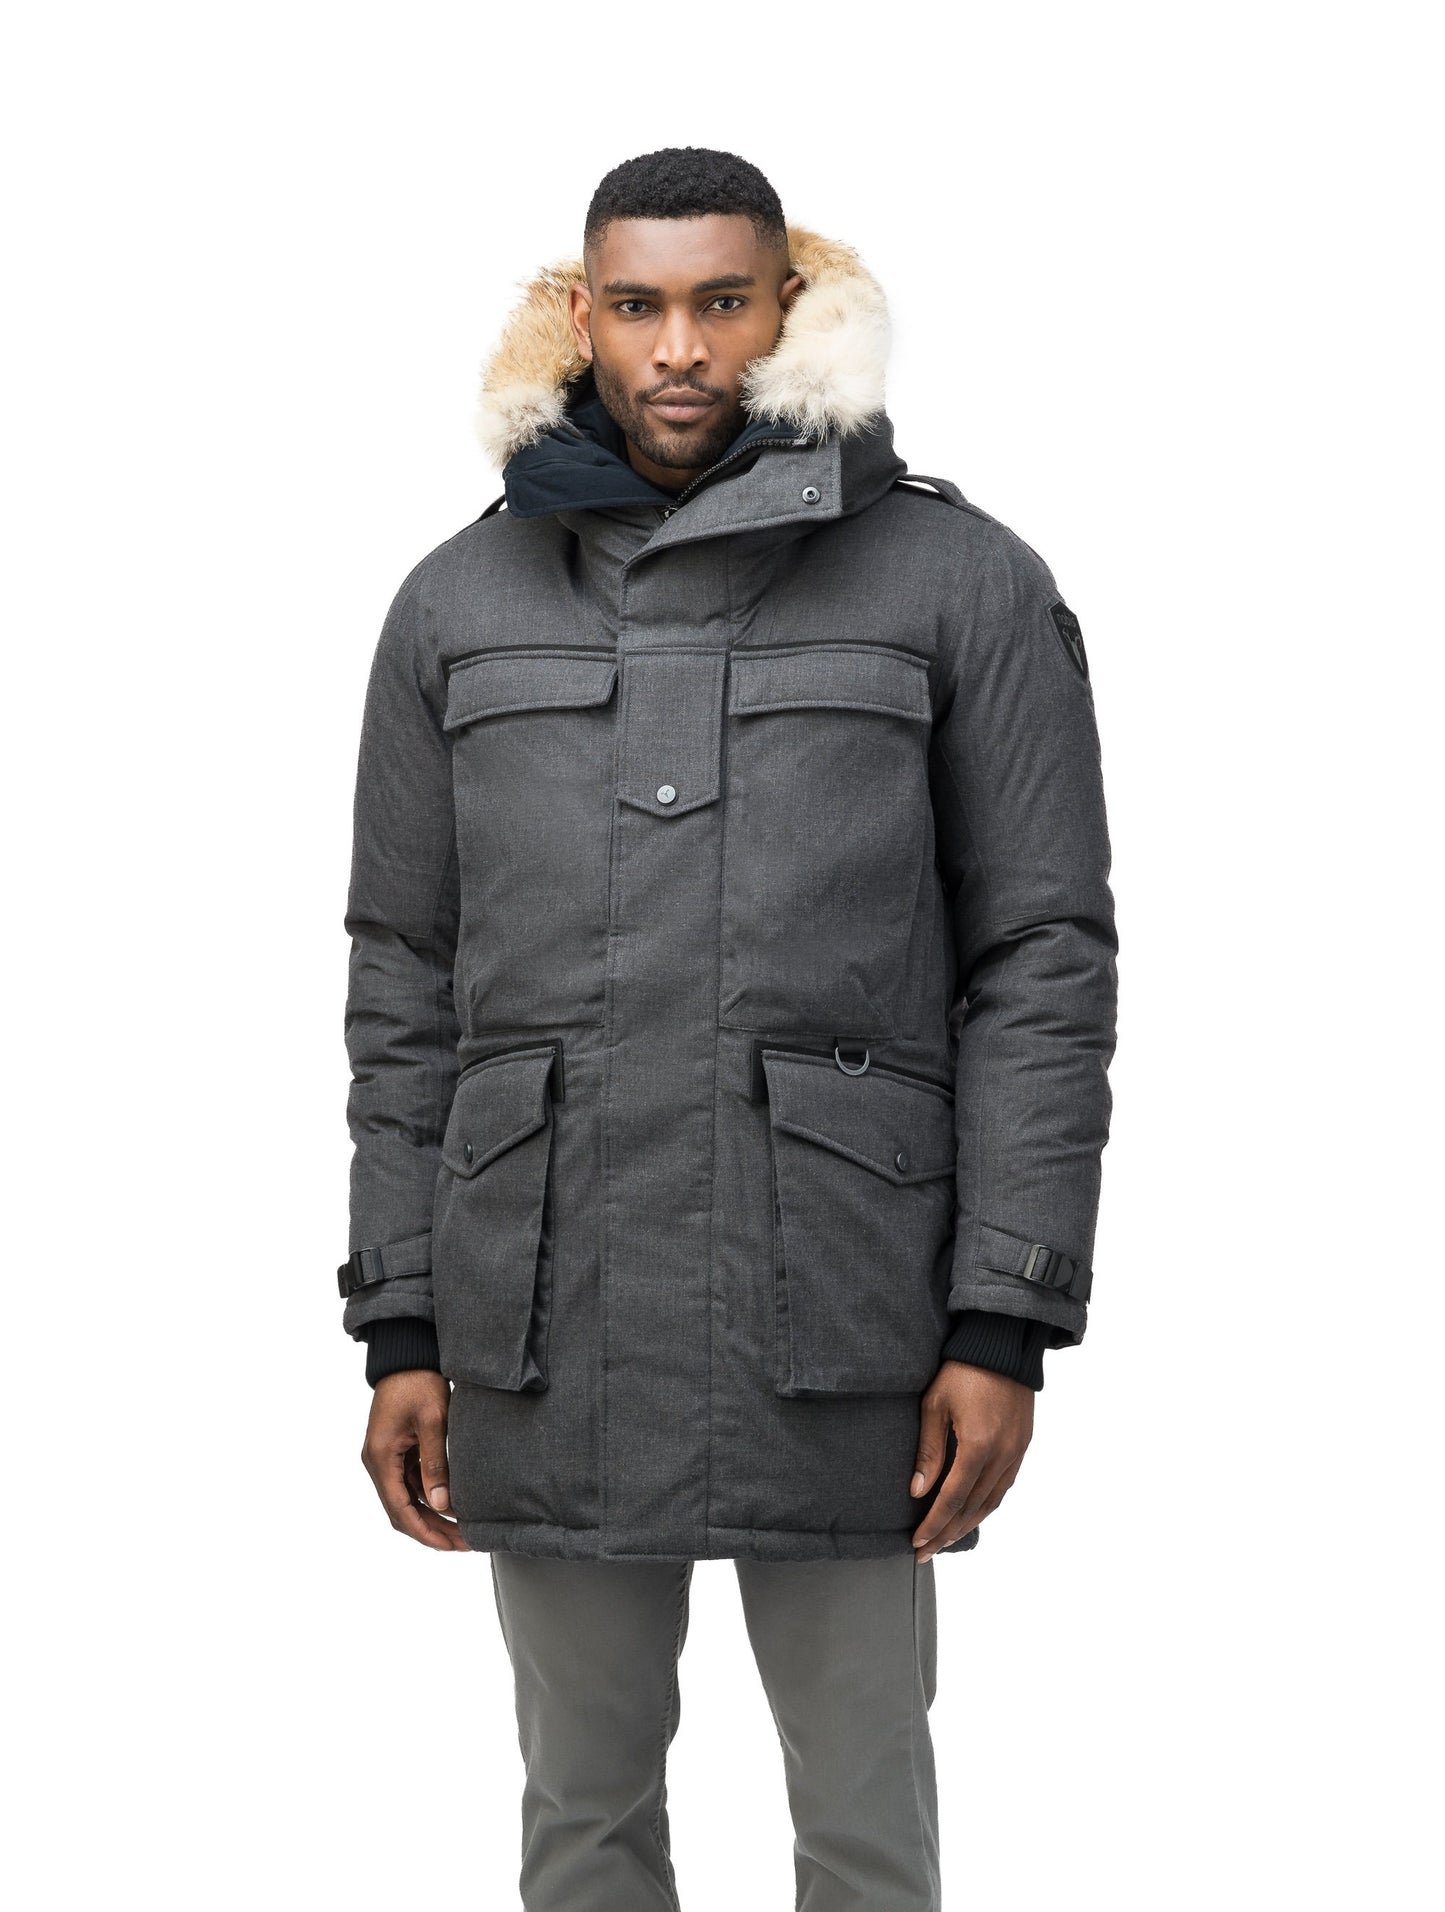 Men's extreme wamrth down filled parka with baffle box construction for even down distribution in H. Charcoal